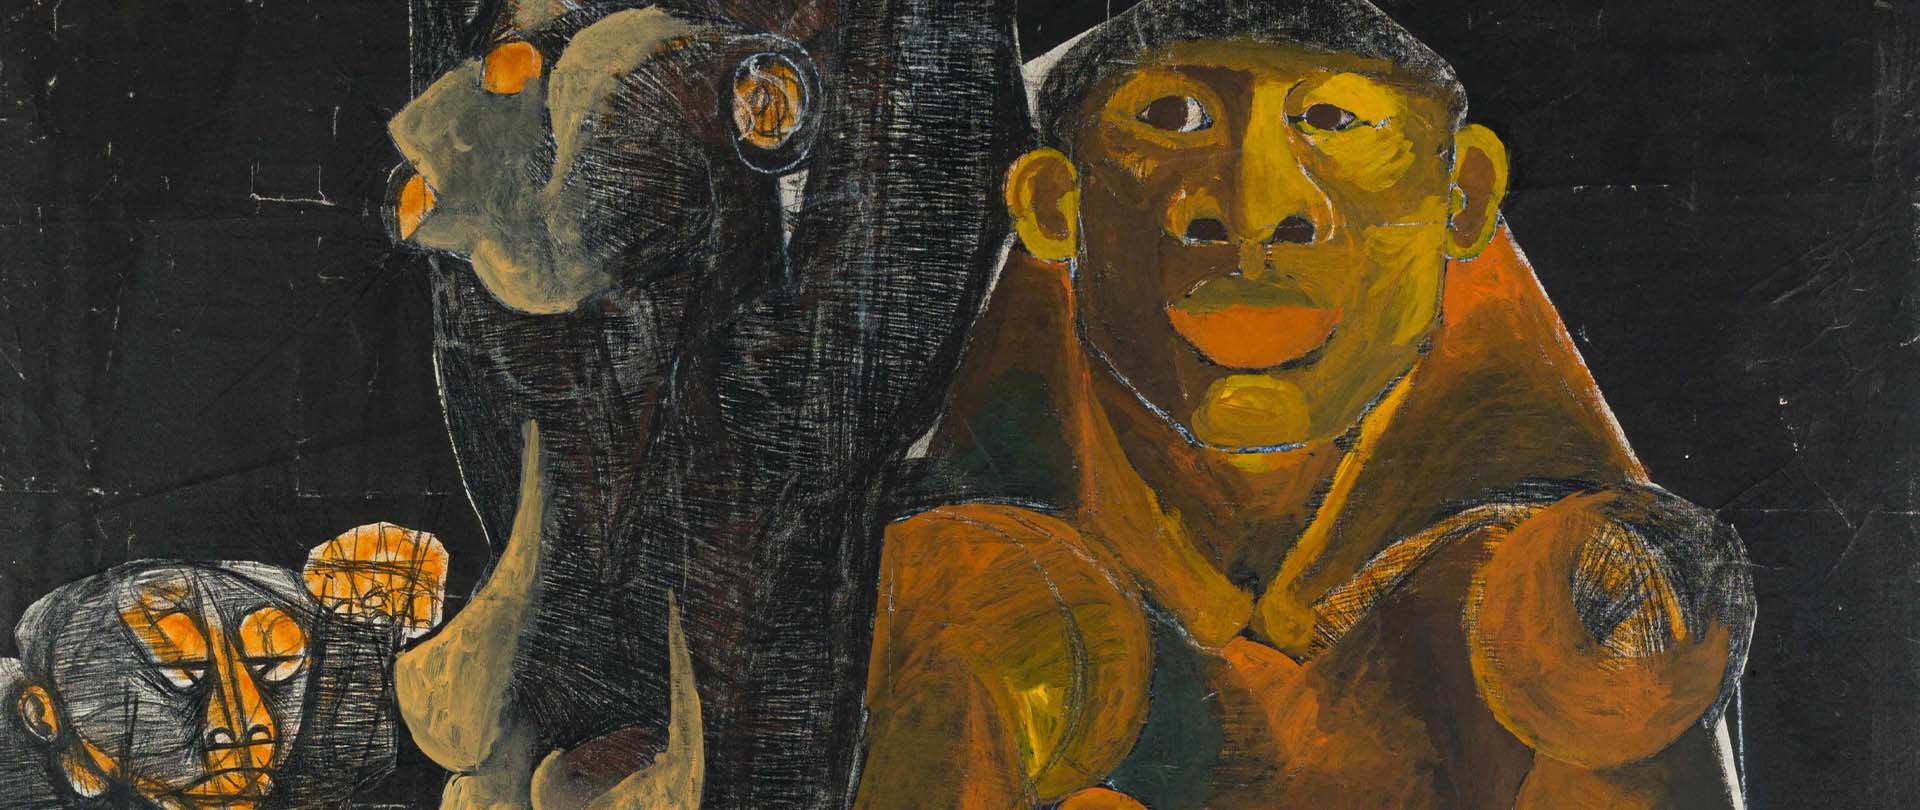 Rare colour work by exiled south African artist Dumile Feni sells for new world record price at Strauss & Co sale in Johannesburg